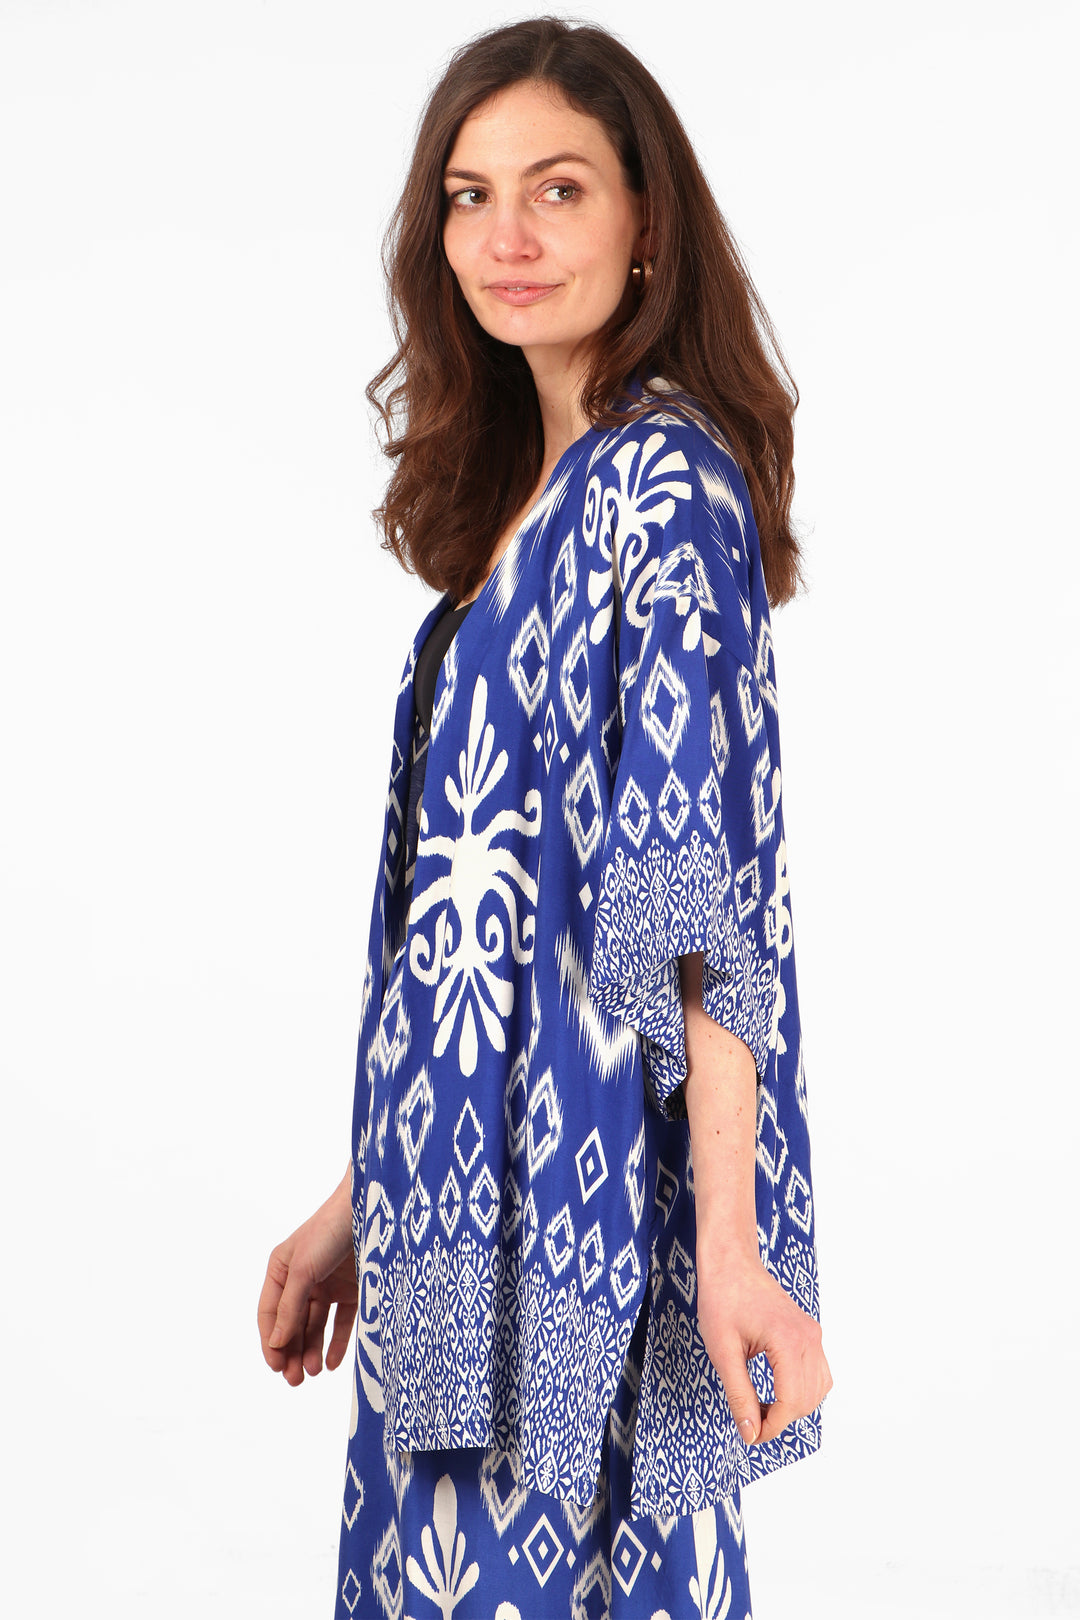 model wearing a blue and white ikat pattern short kimono top with 3/4 sleeves and an open front